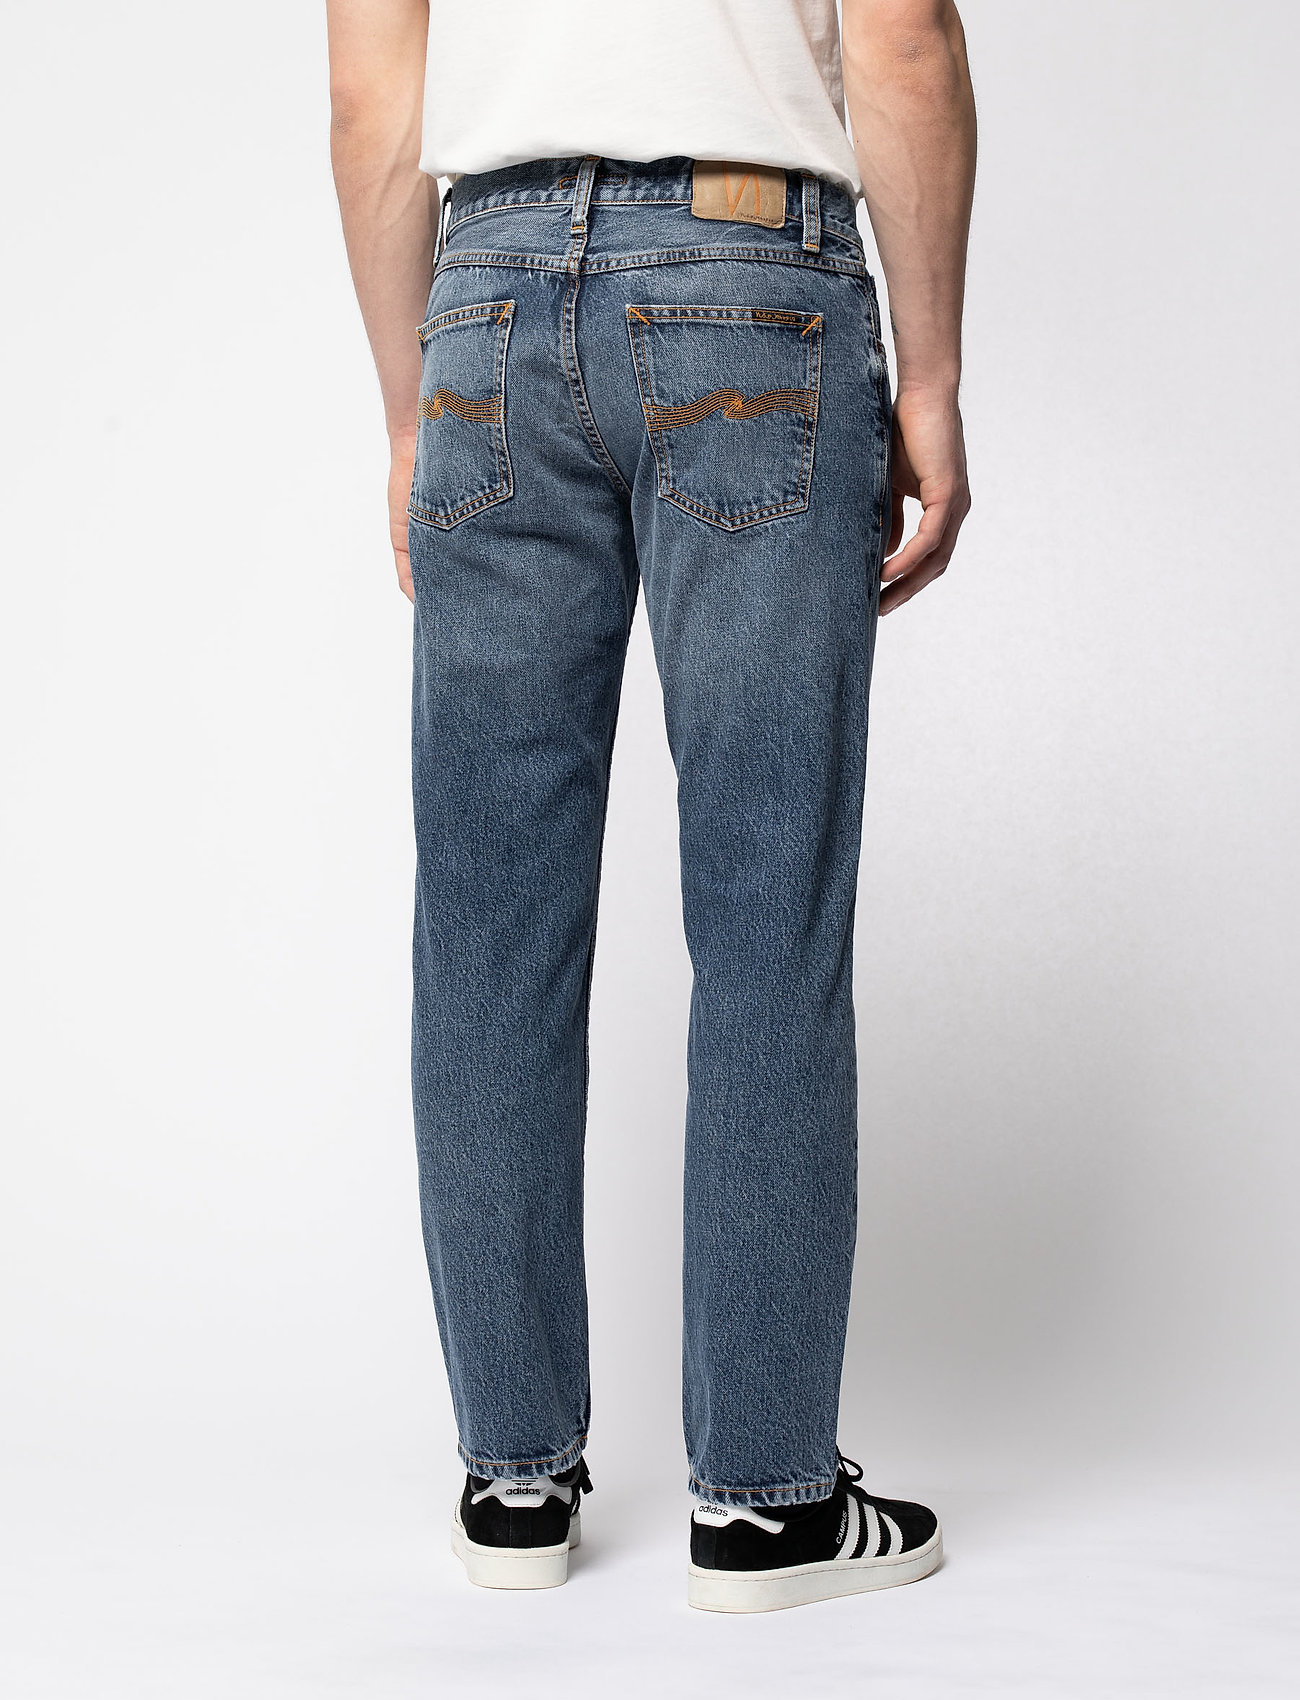 Nudie Jeans - Gritty Jackson - regular jeans - far out - 3